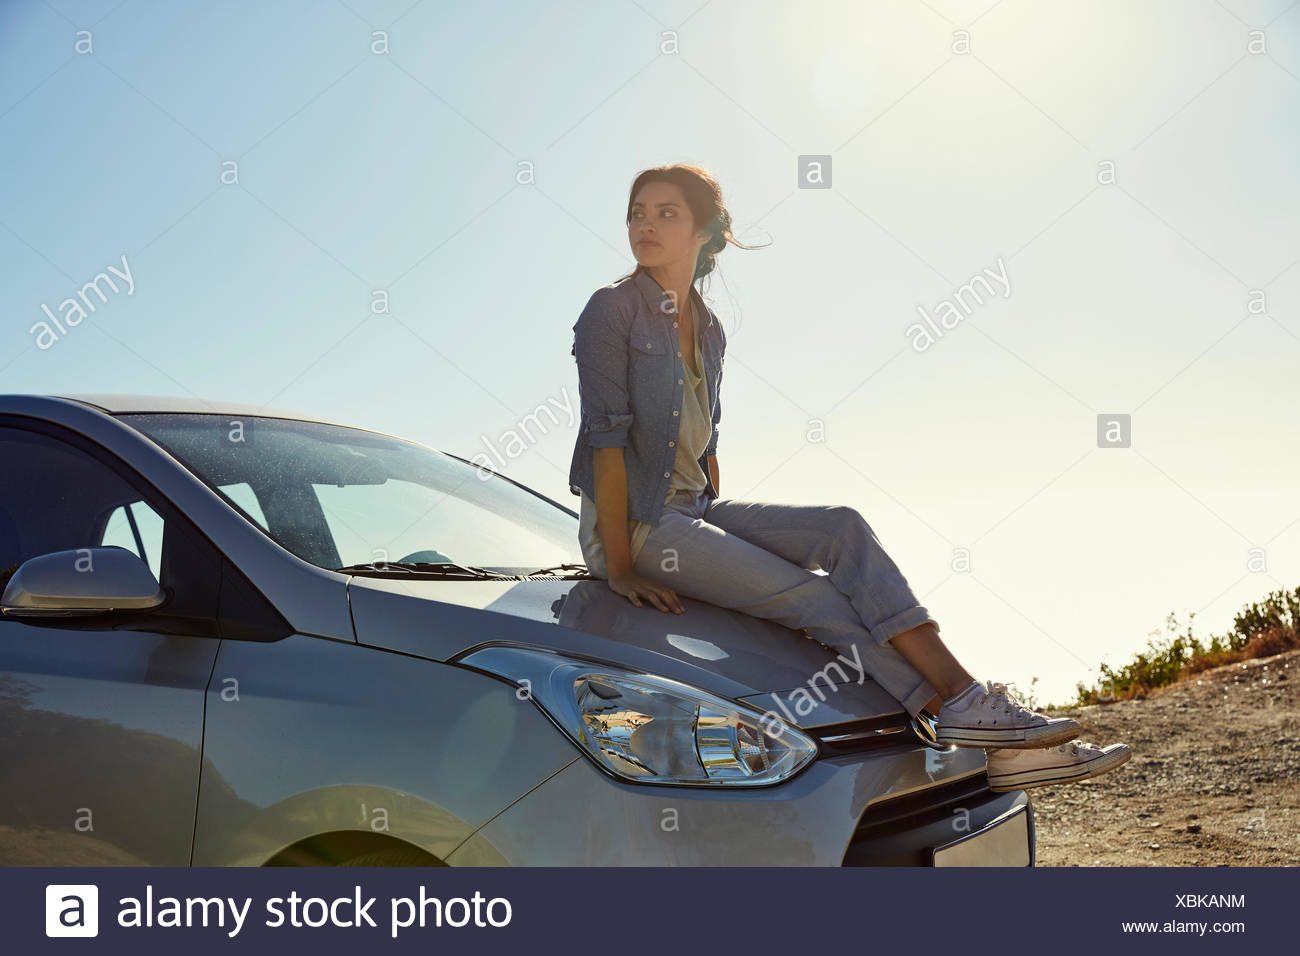 young-woman-sitting-on-a-car-looking-around-XBKANM.jpg